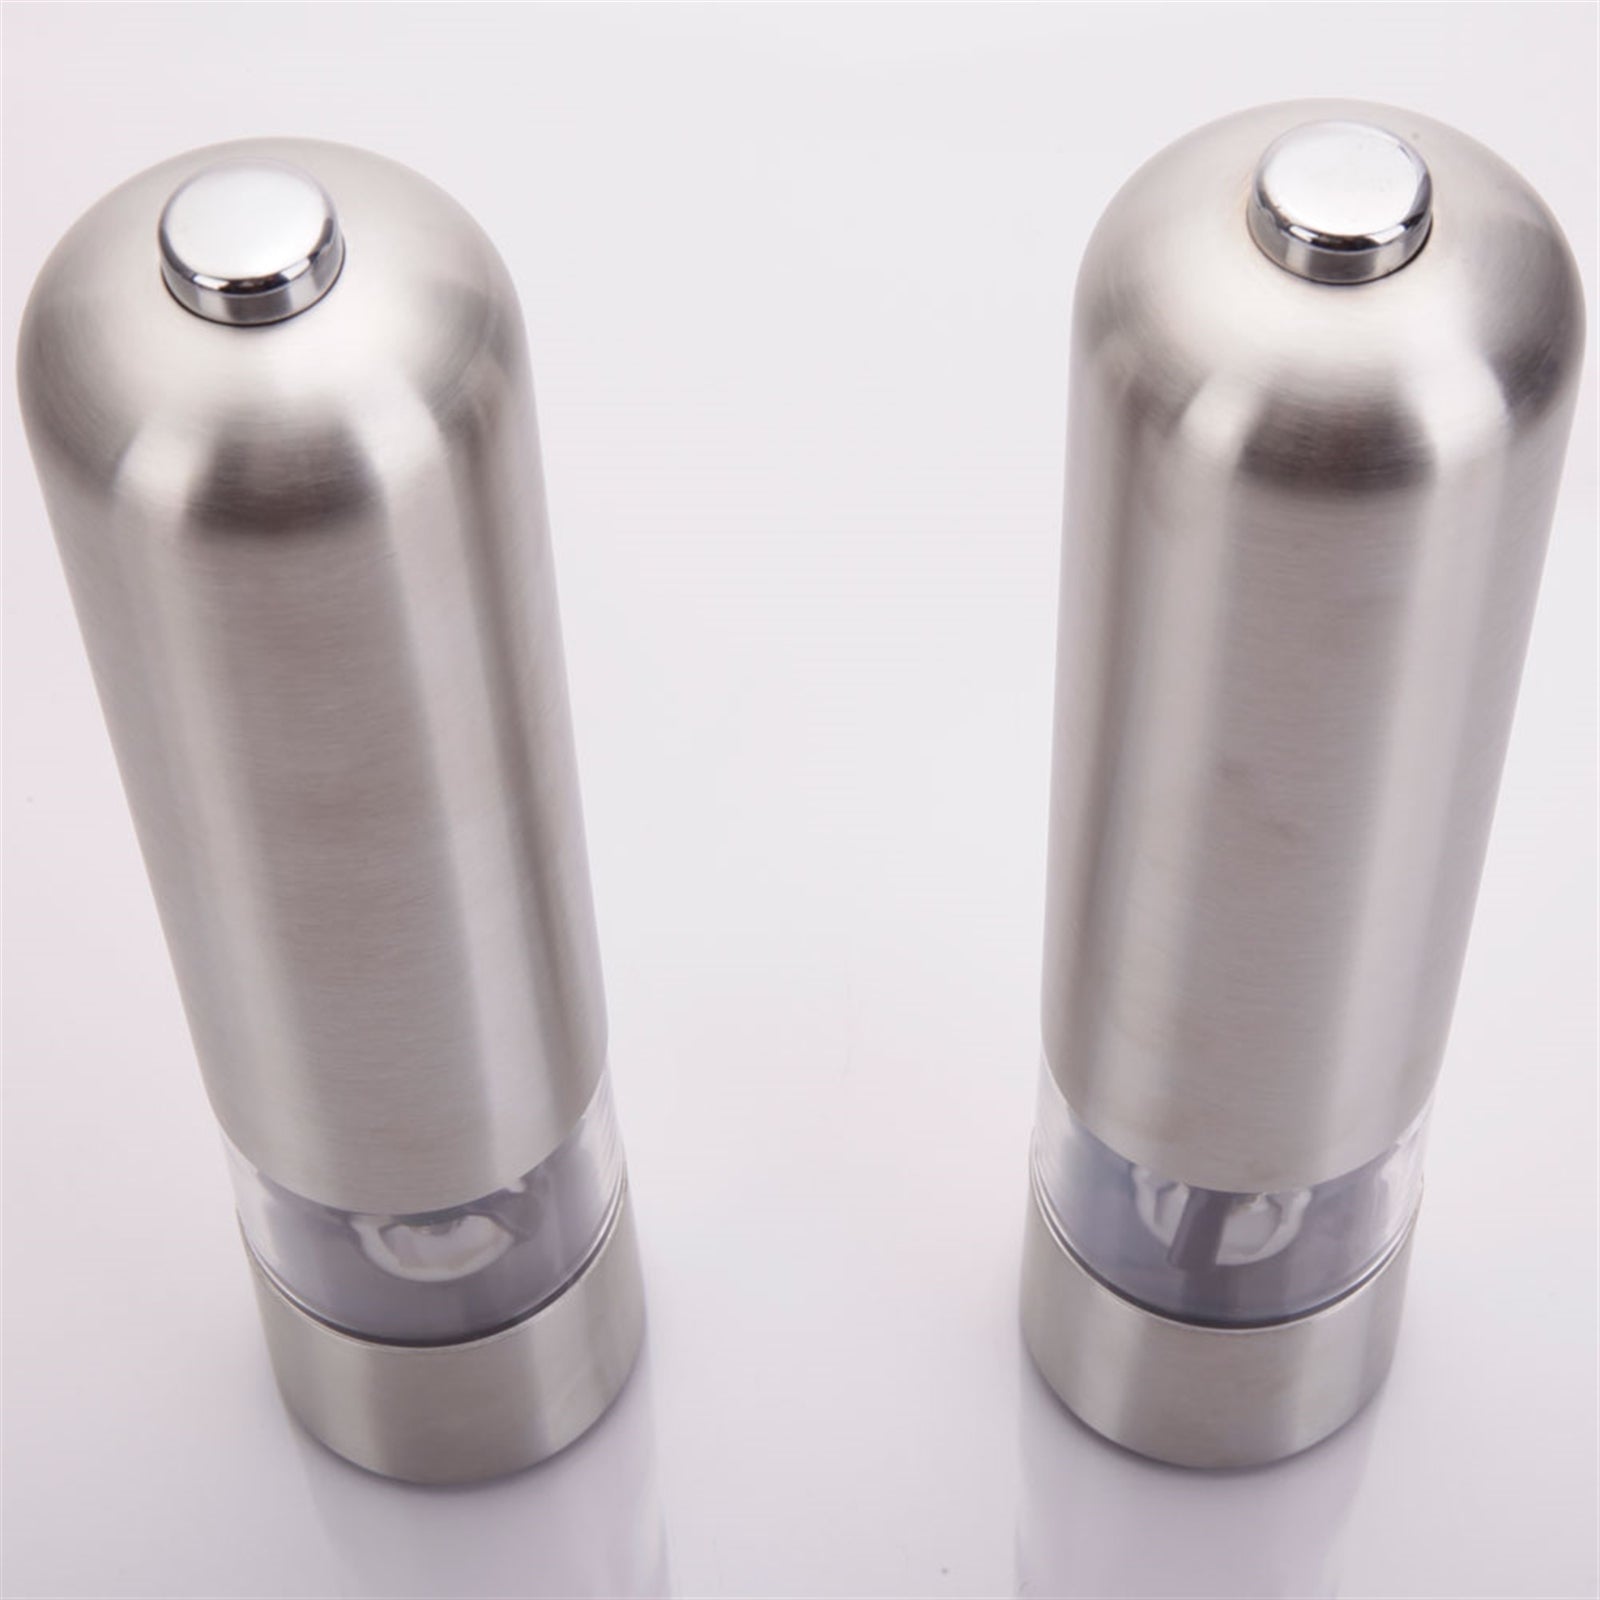 2pcs Stainless Steel Electric Automatic Pepper Mills Salt Grinder